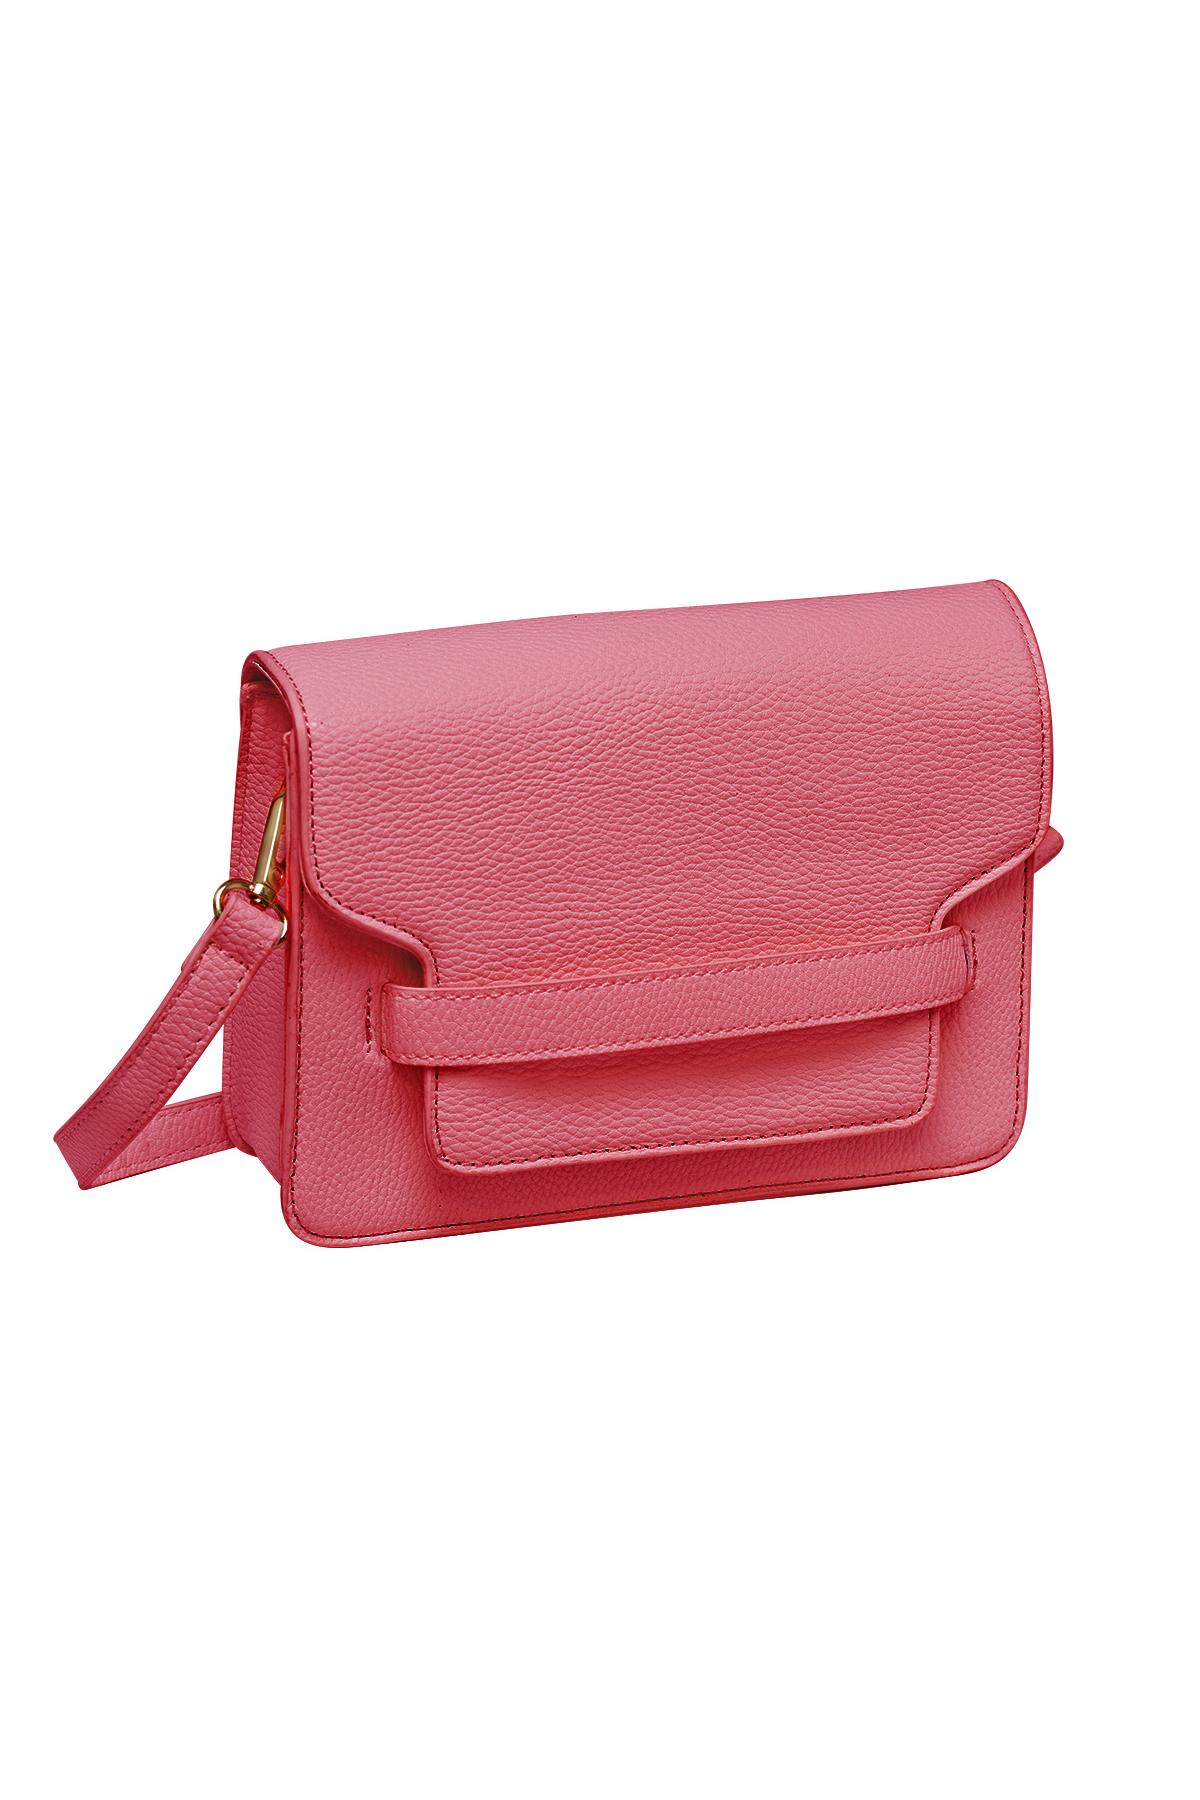 Square PU leather shoulder bag with buckle closure 